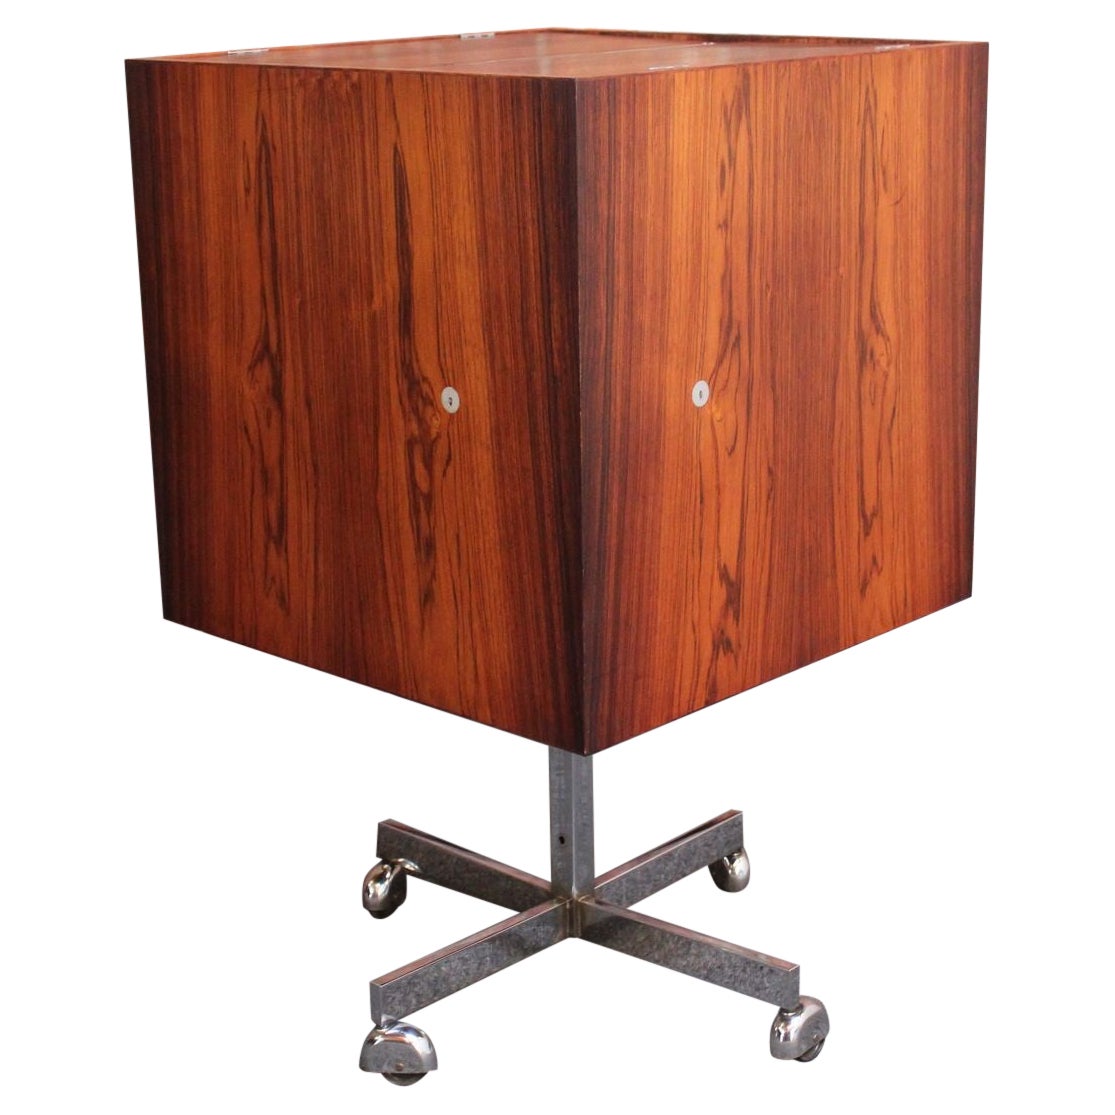 Danish Rosewood and Chrome Selectform "Magic Cube" Mobile Bar by Poul Nørreklit For Sale